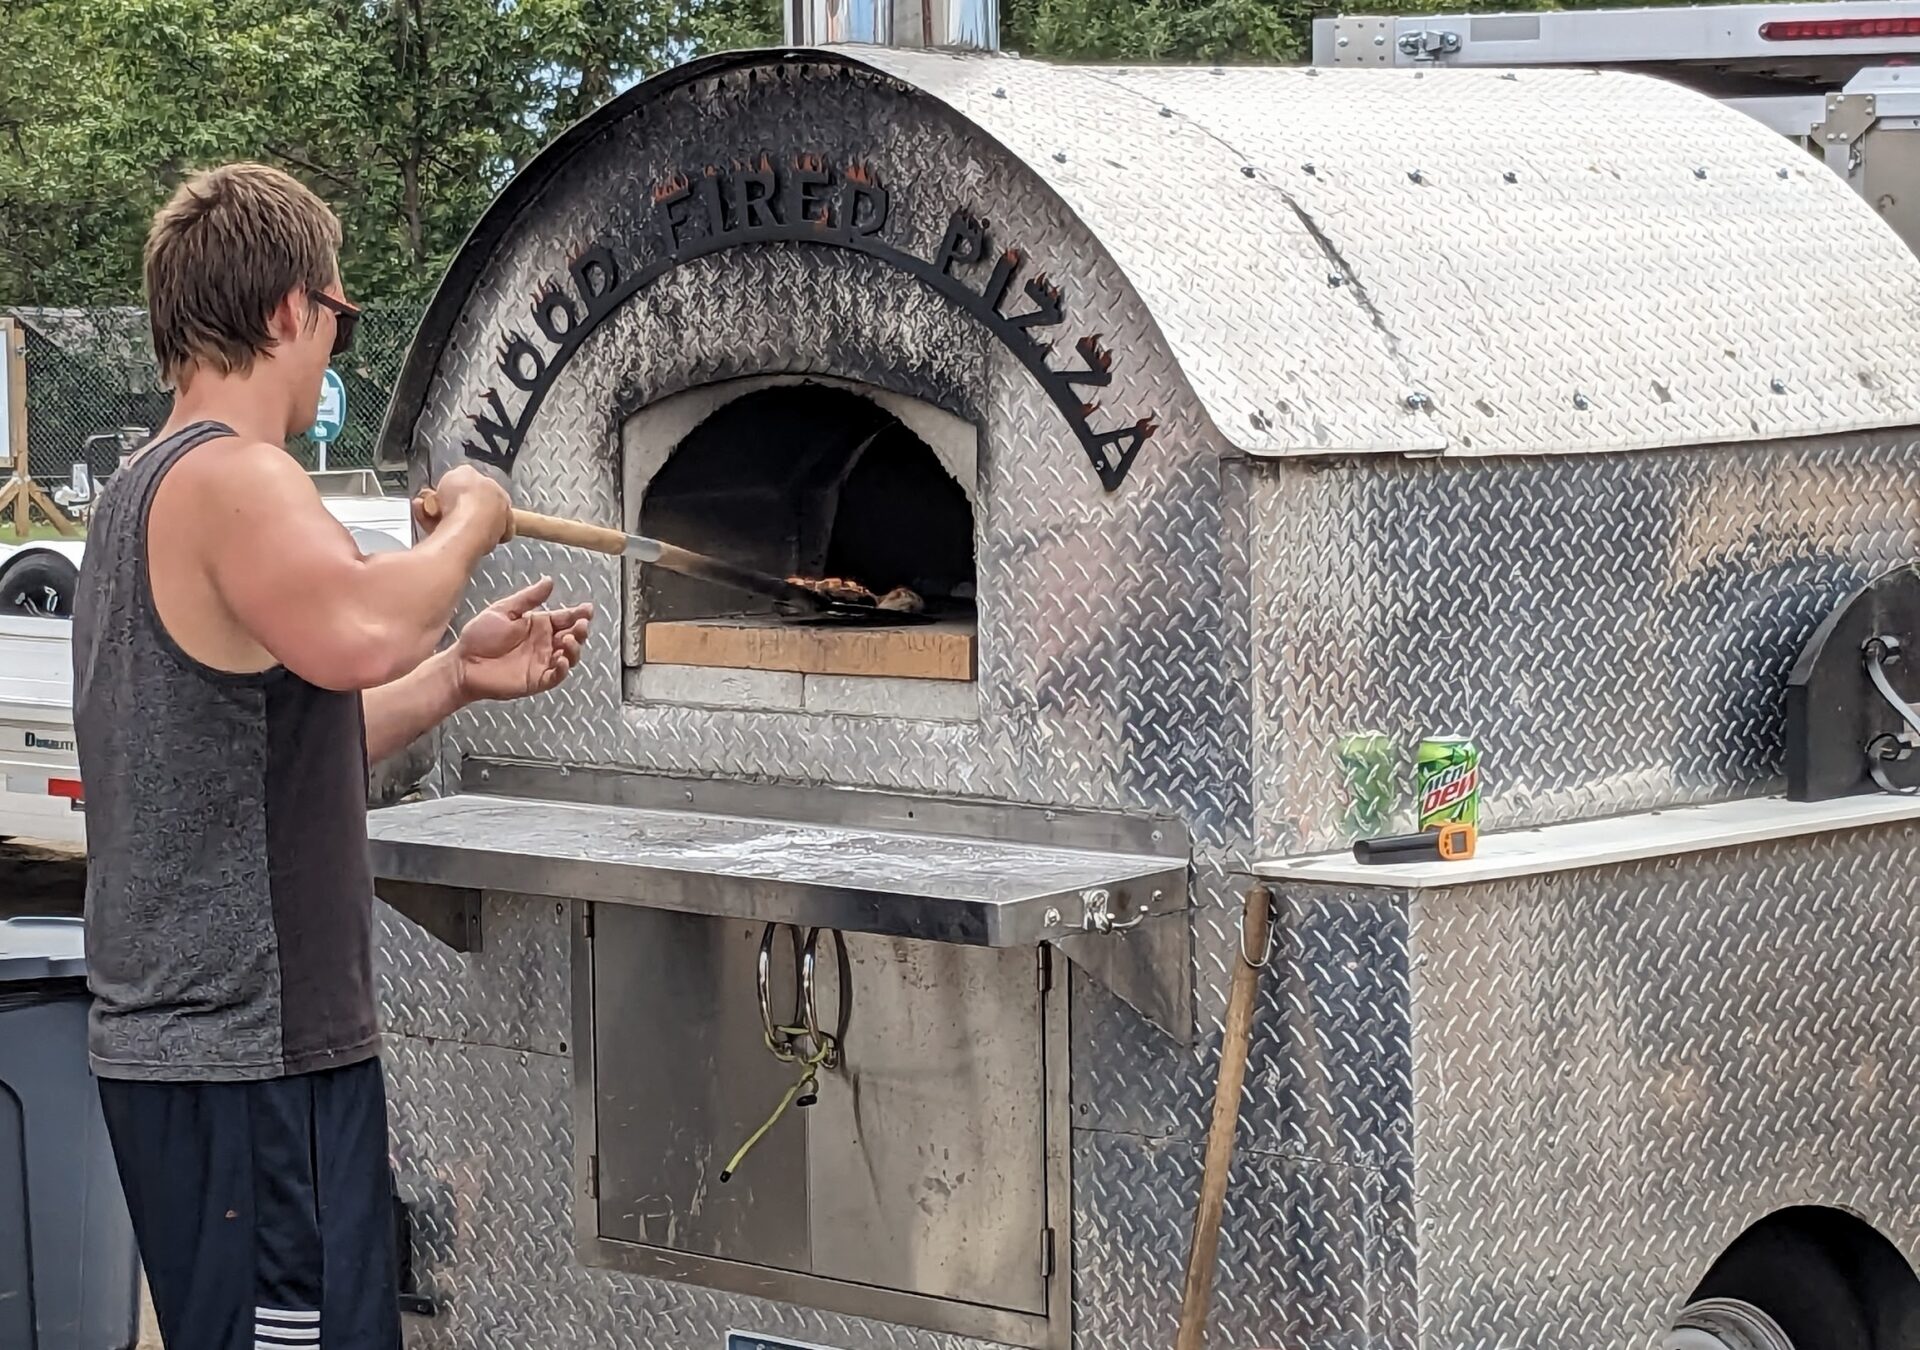 Wood-fired pizza is just one of the treats available top those who attend the Brown County Fair. Aberdeen Insider photo by Scott Waltman